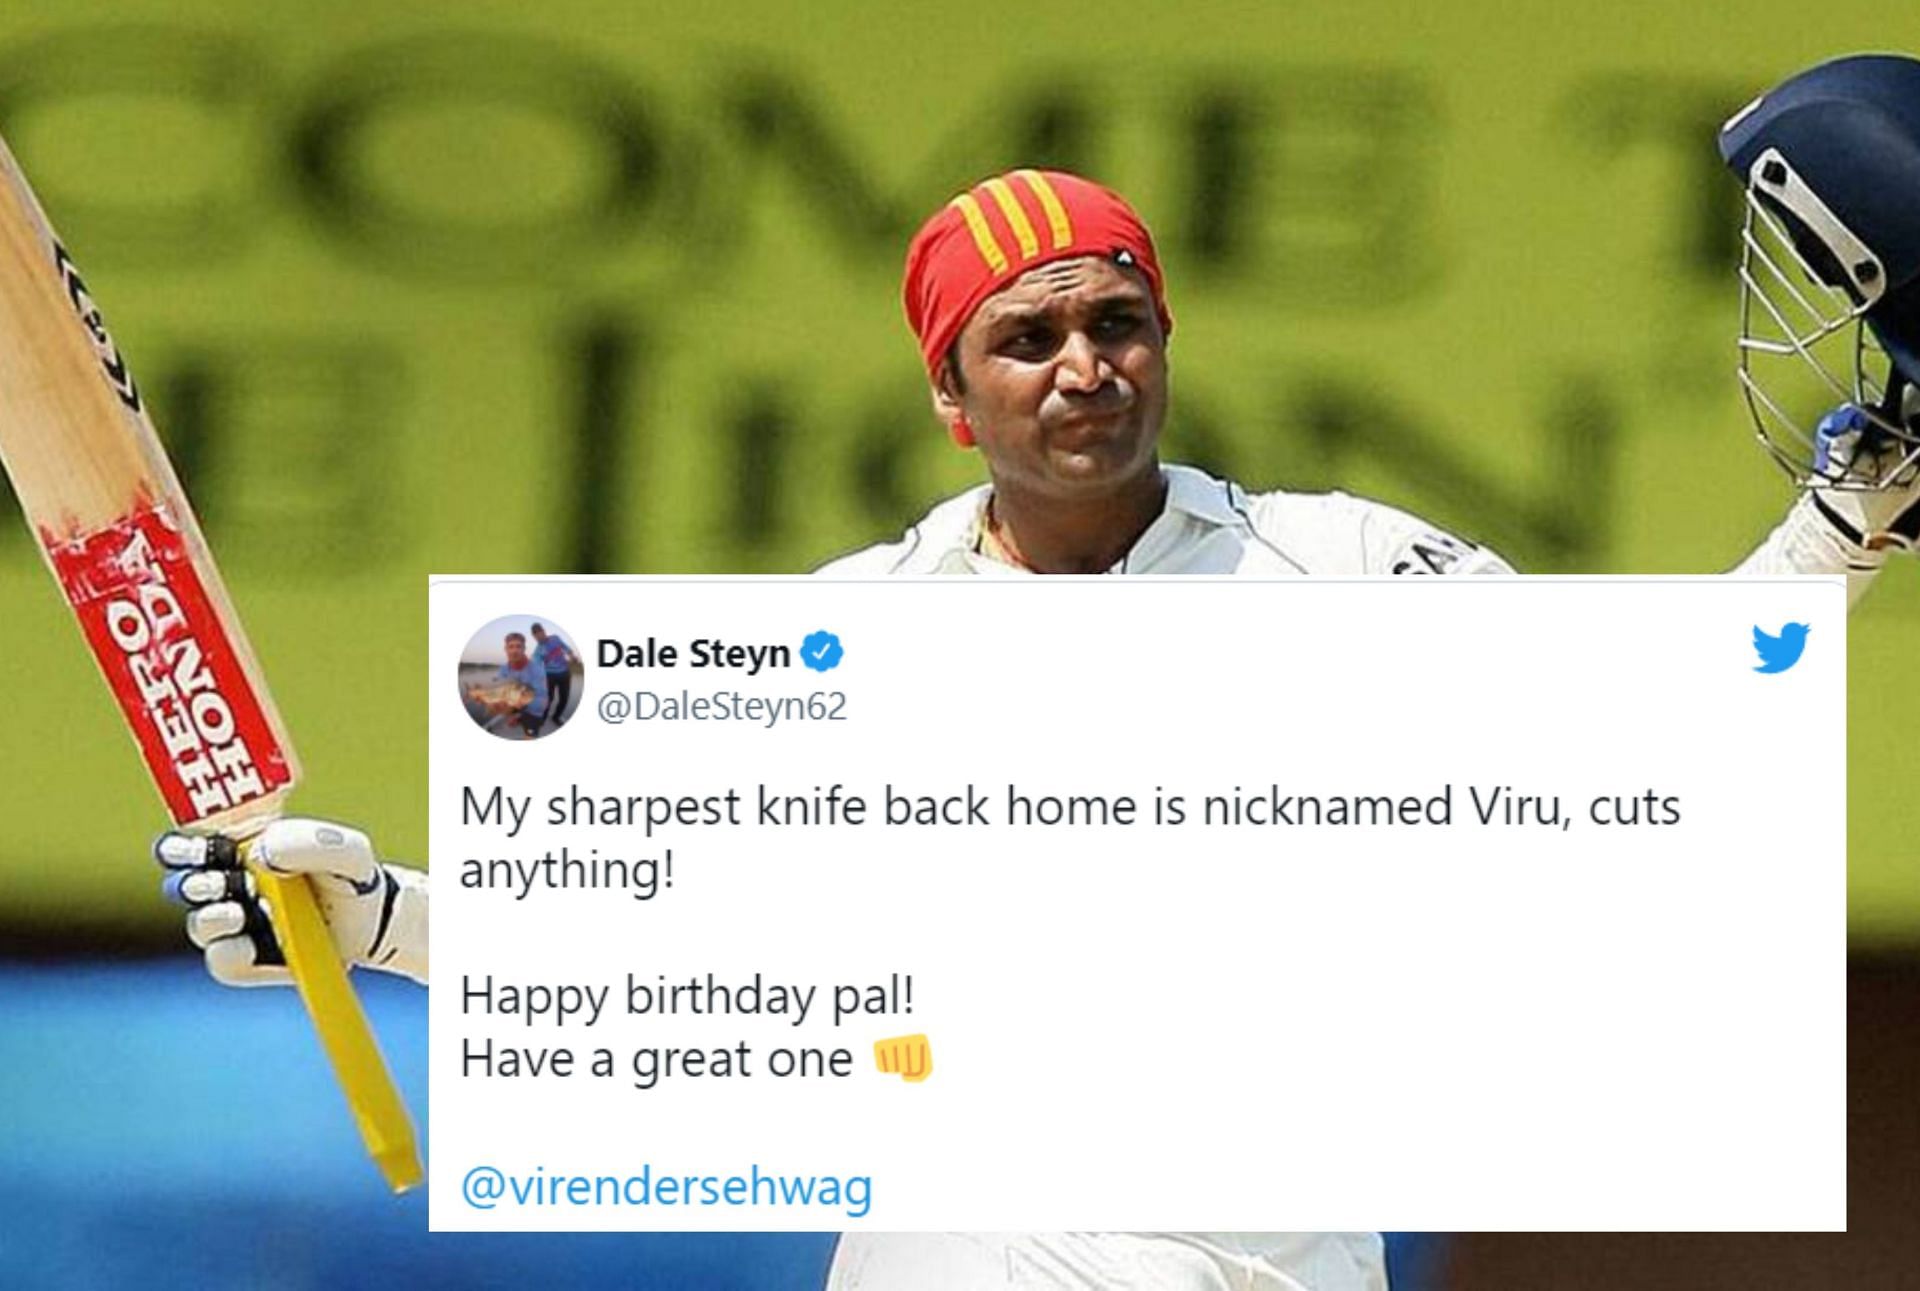 The cricket fraternity extends special wishes to Virender Sehwag on his 43rd birthday.